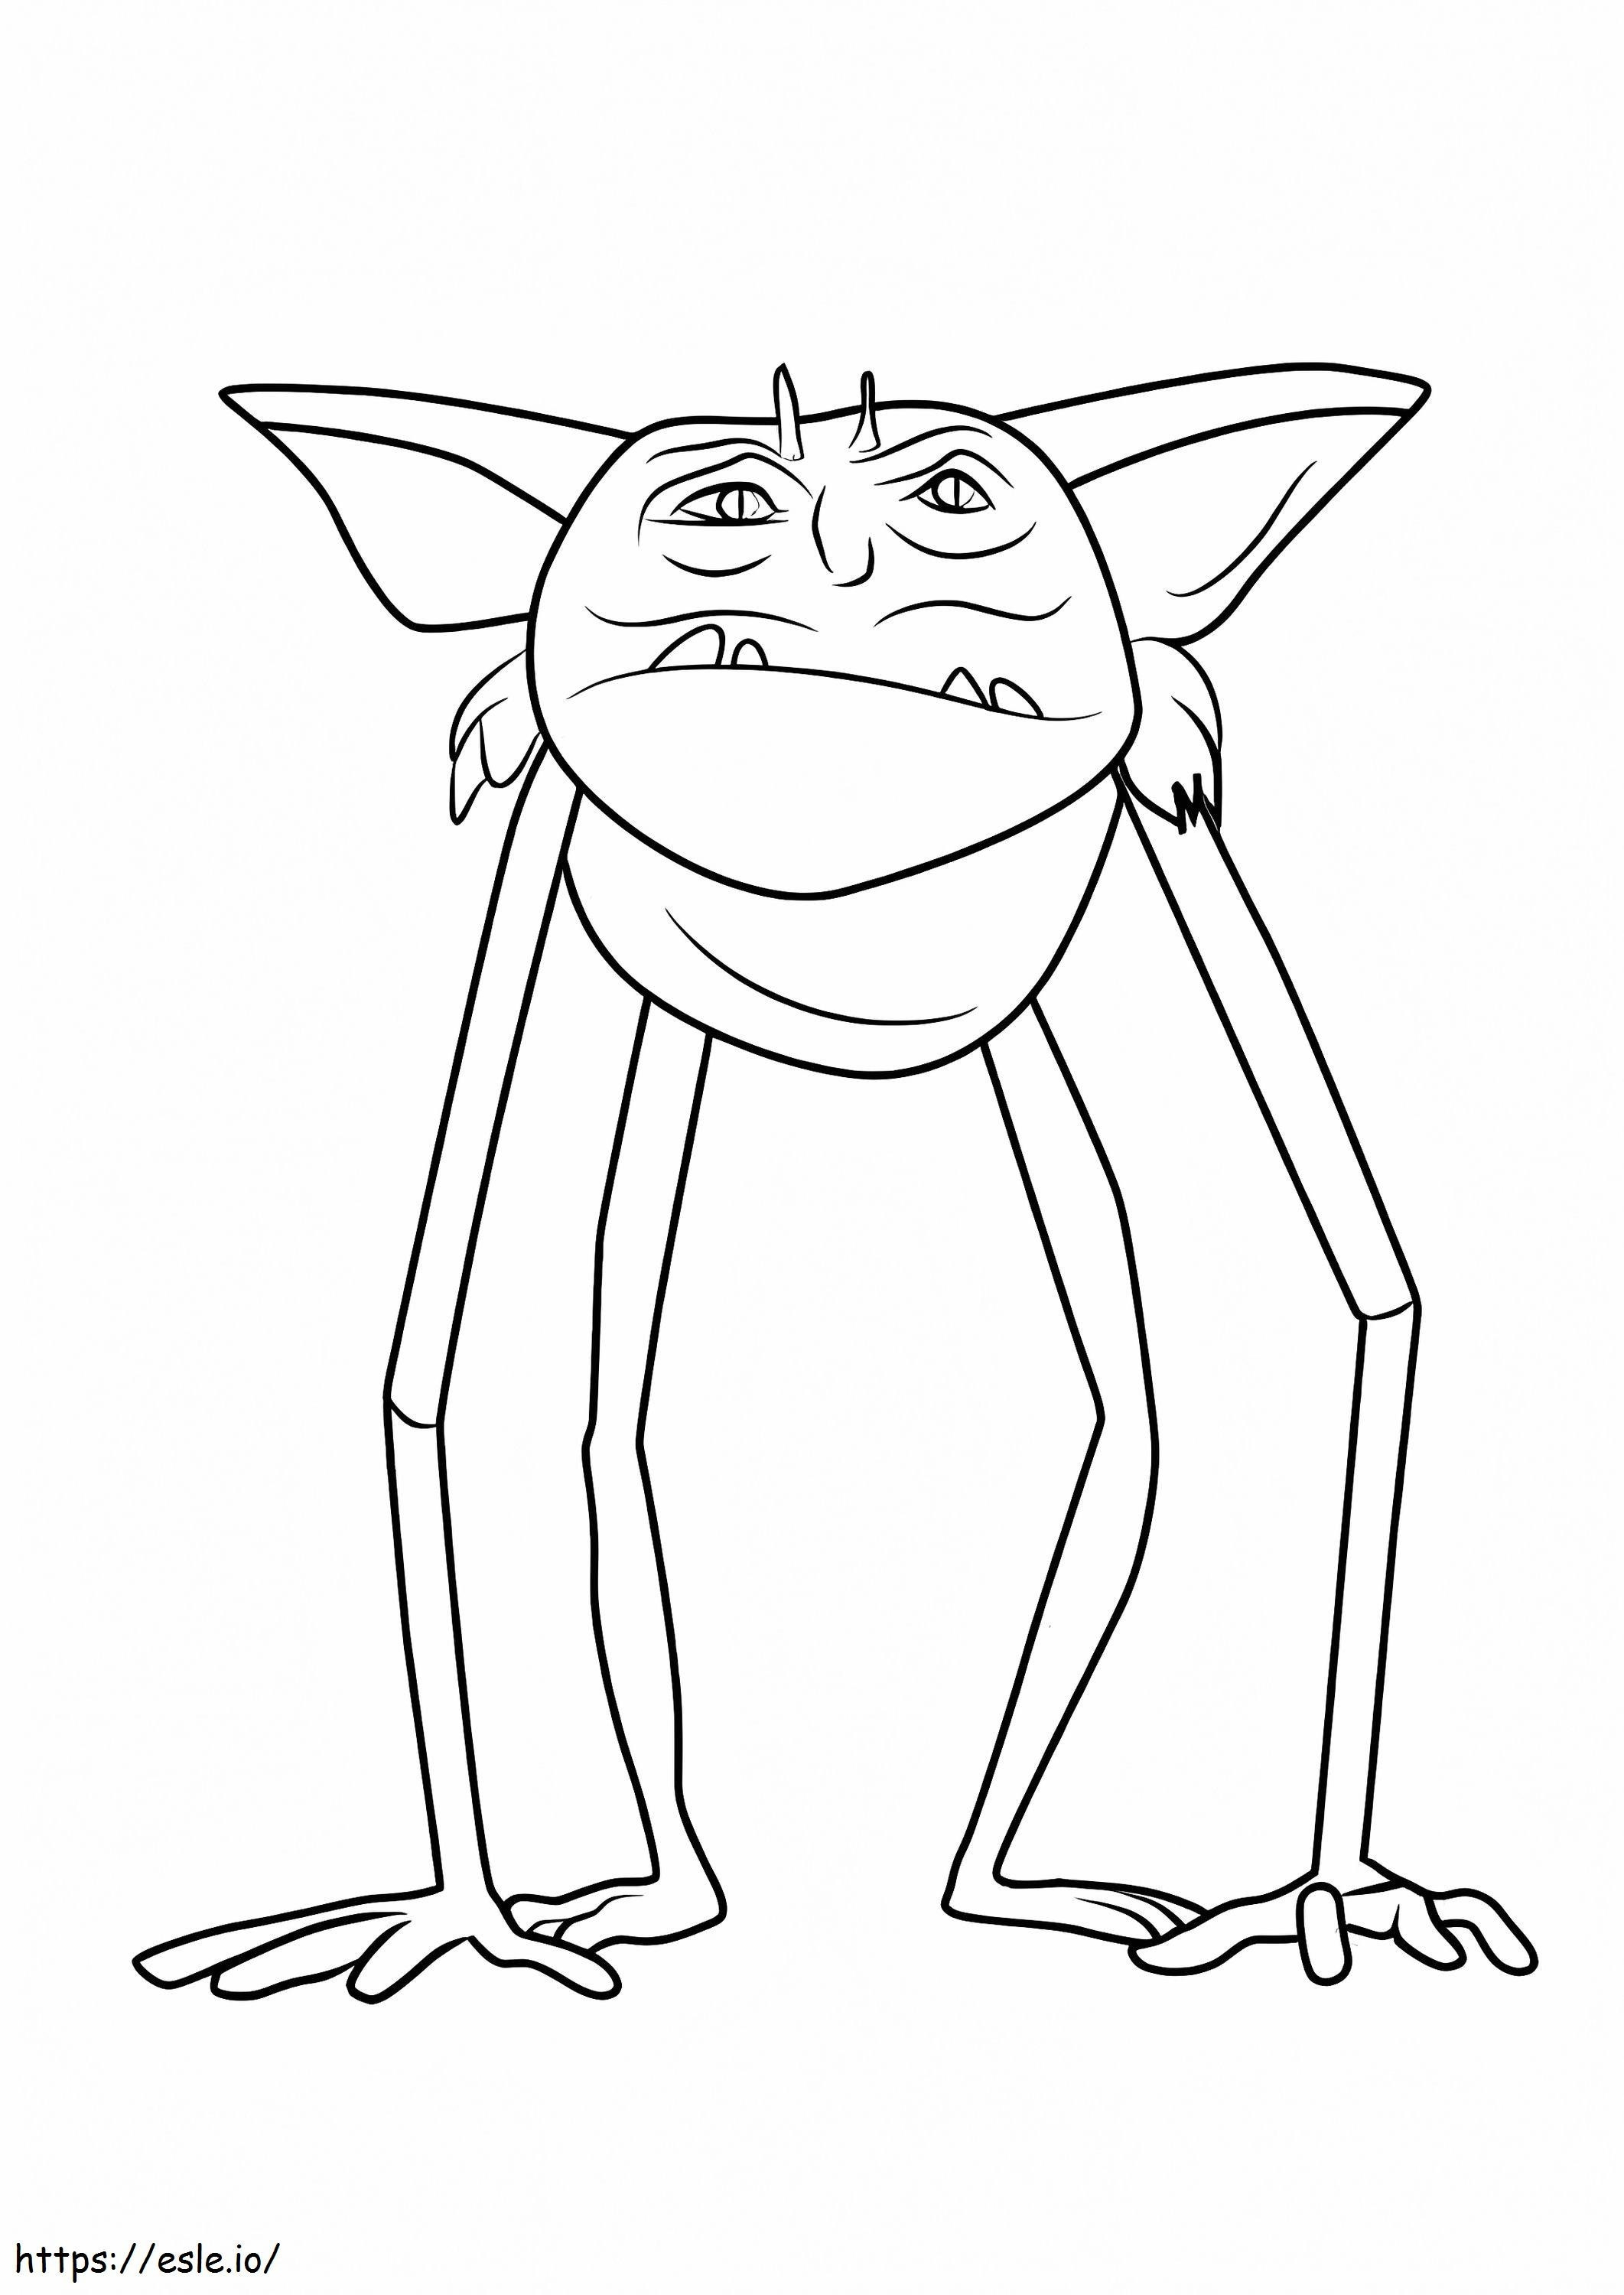 Basic Goblin coloring page